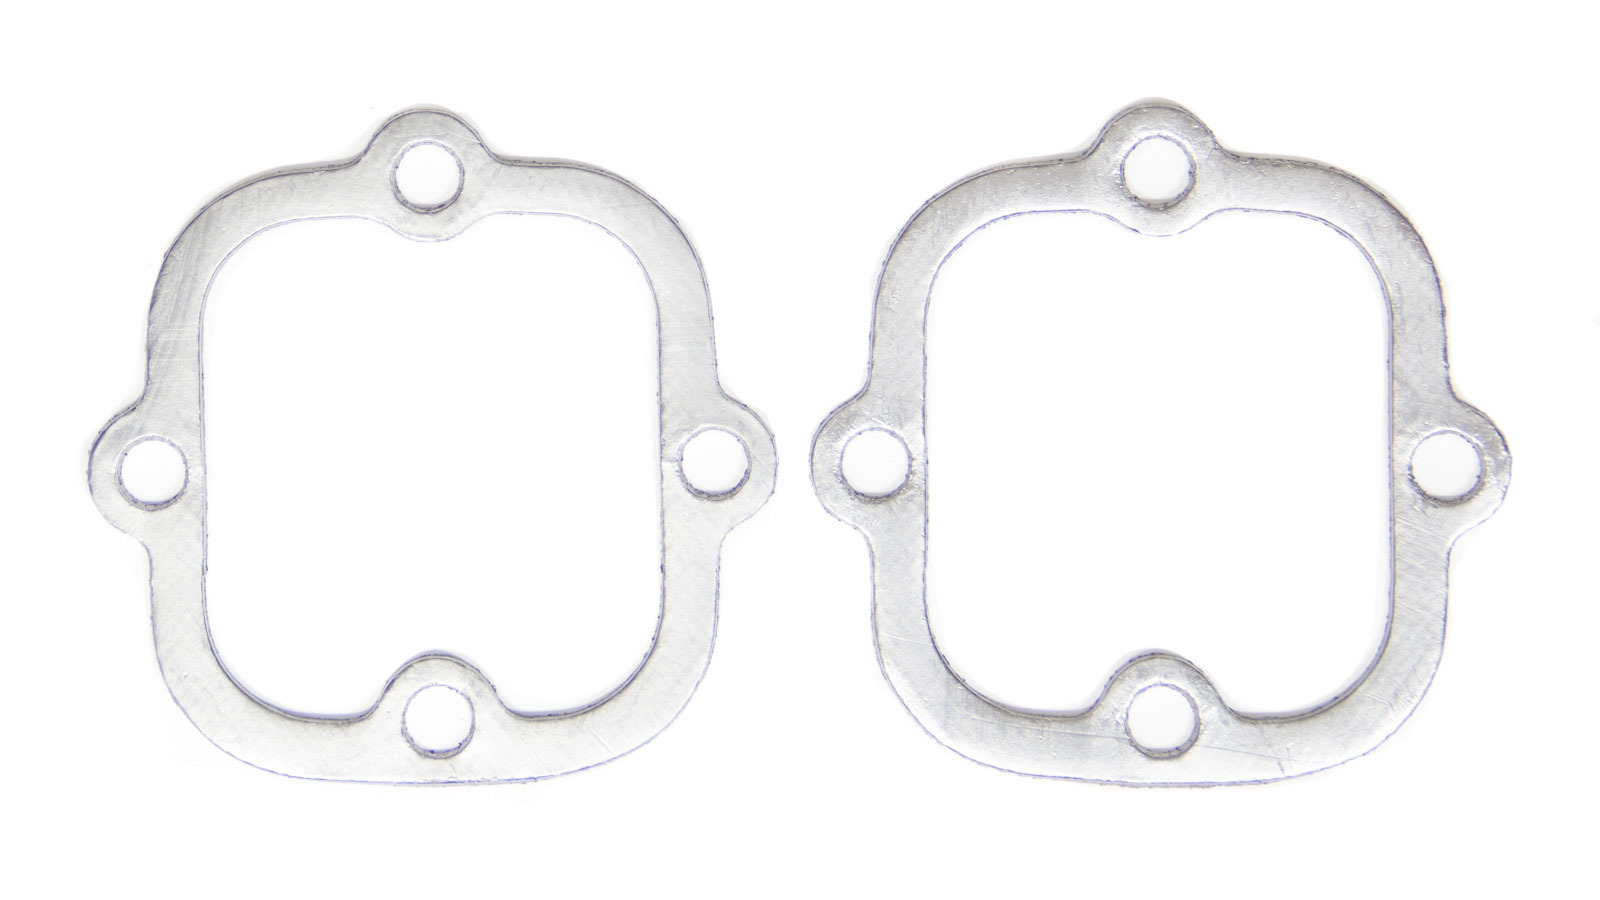 Remflex Gaskets 8017 Collector Gasket, 3-1/8 x 2-7/8 in Rectangle, 4-Bolt, Graphite, Street and Performance Headers, Pair